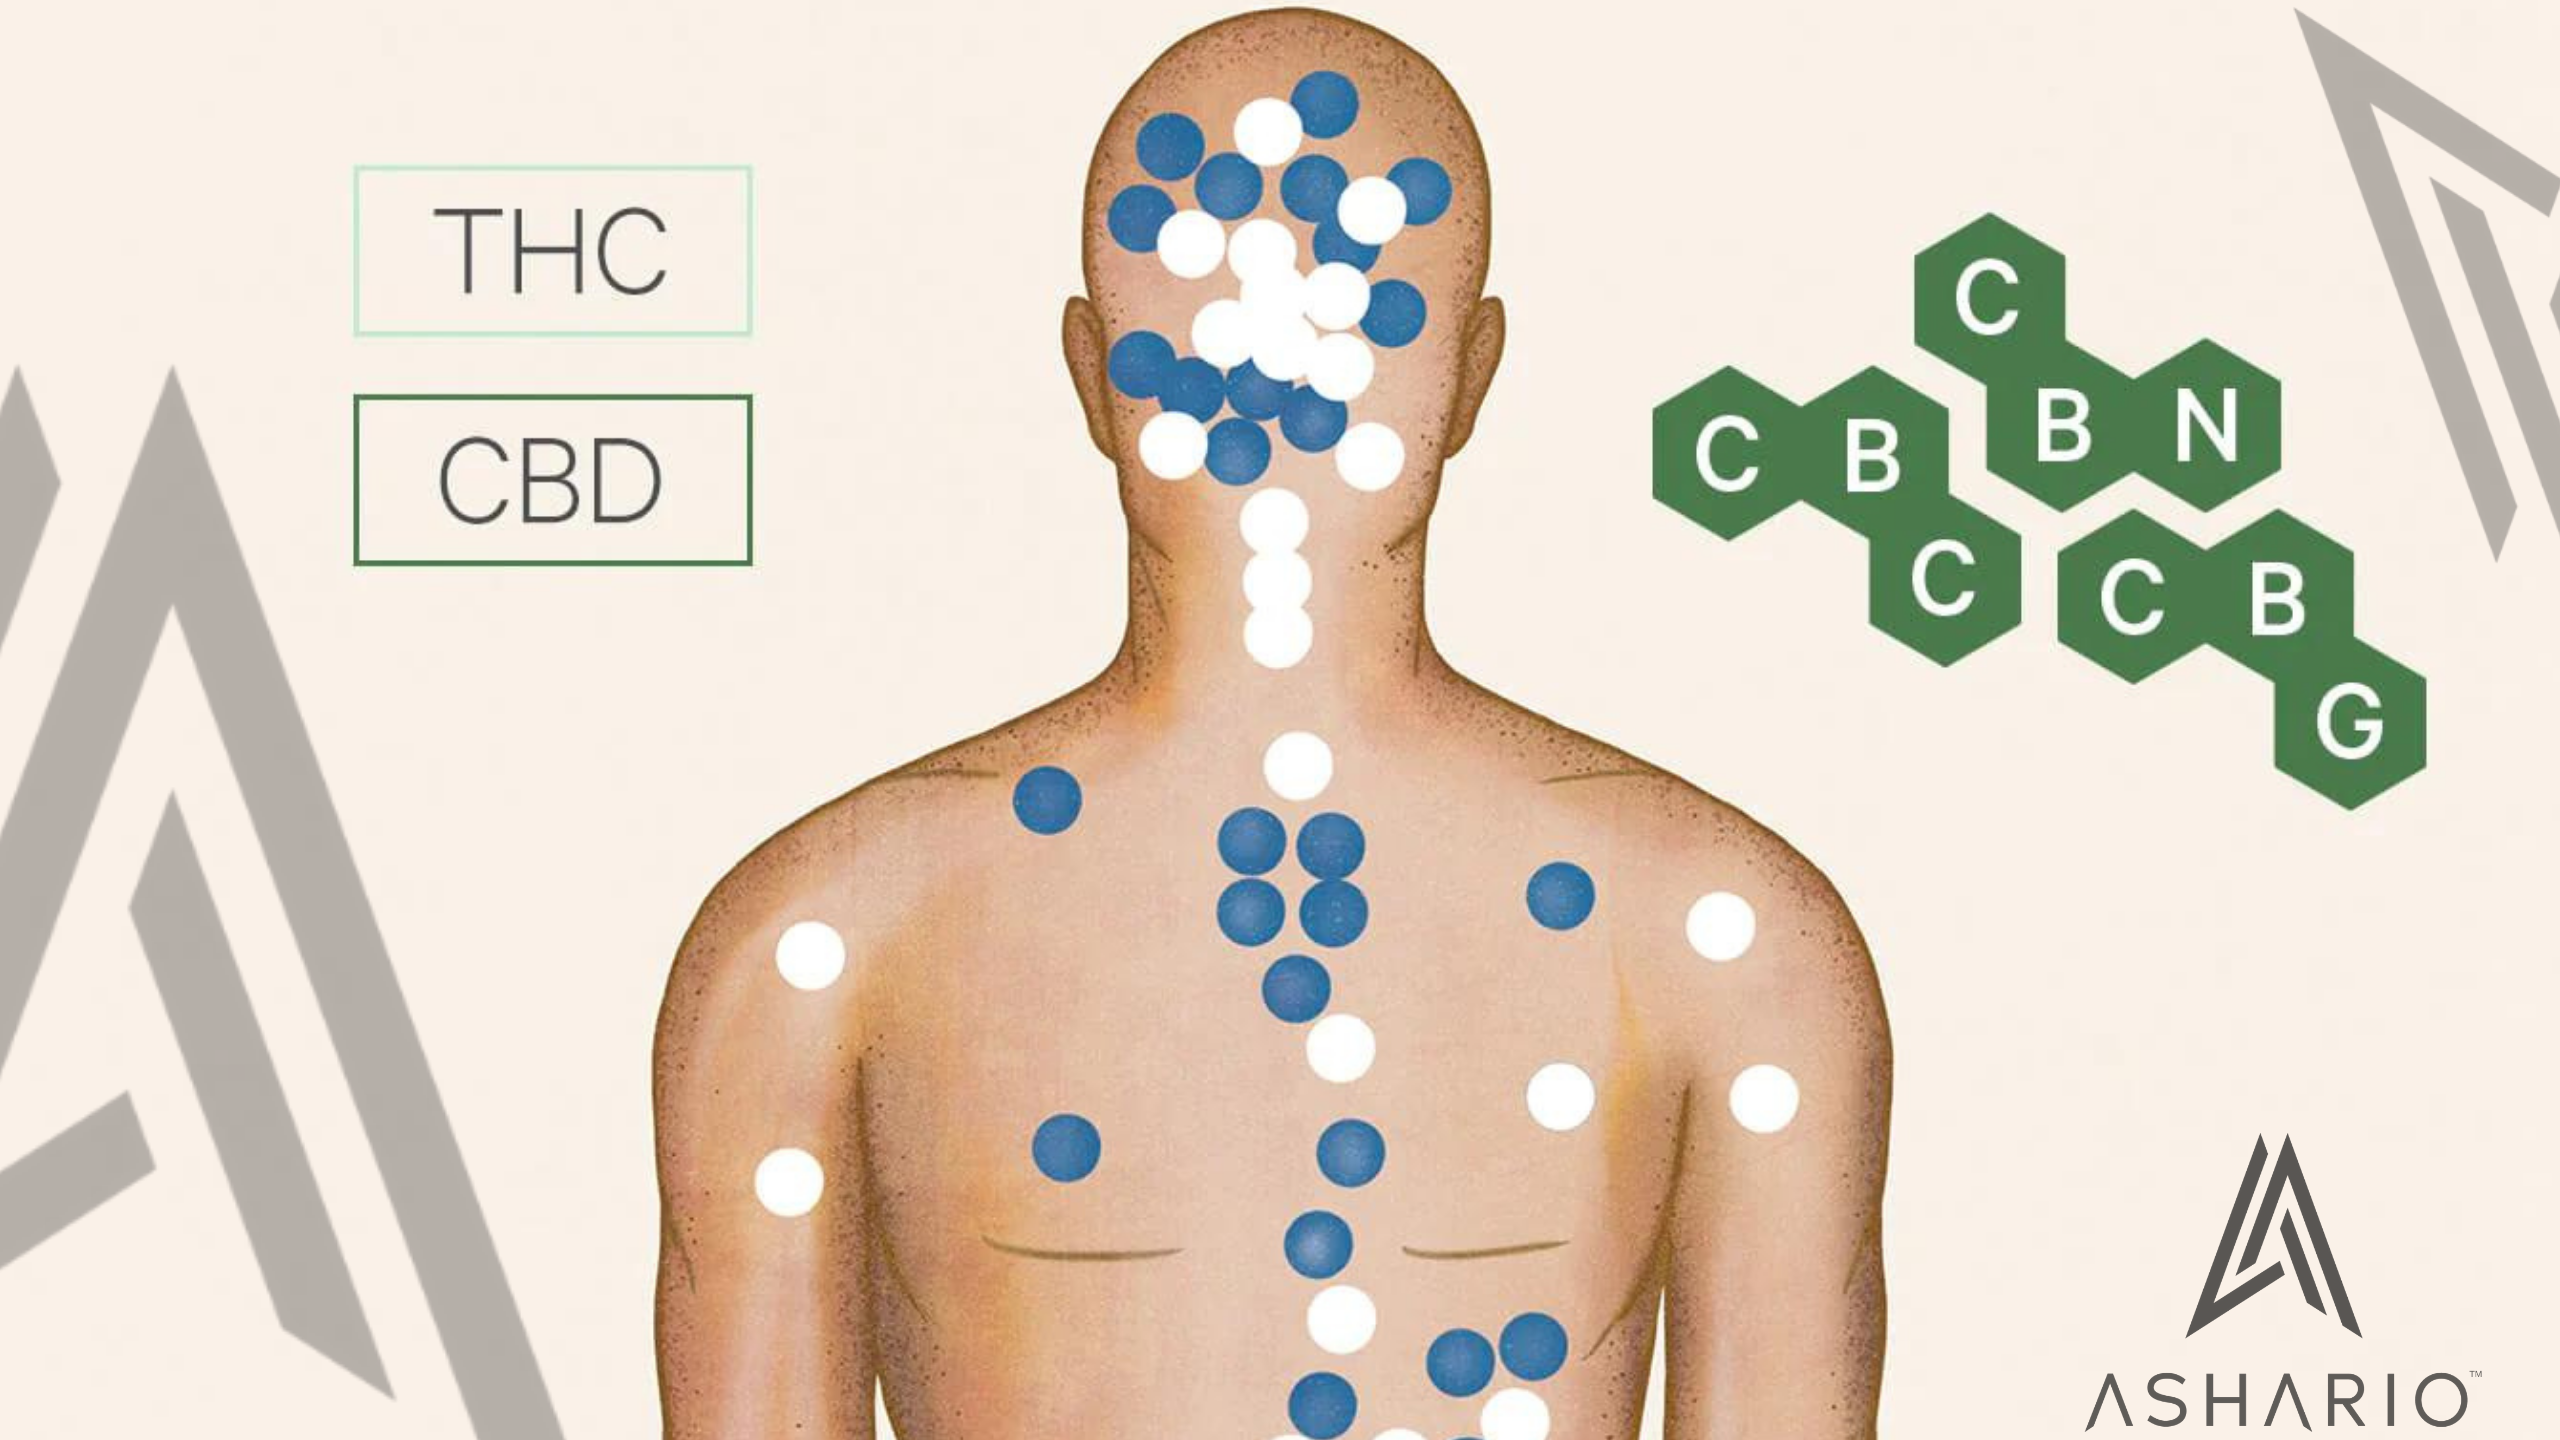 Delve into the world of minor cannabinoids with Ashario Cannabis as your guide. Explore the unique properties of CBG, CBC, and CBN, and discover their potential therapeutic benefits.